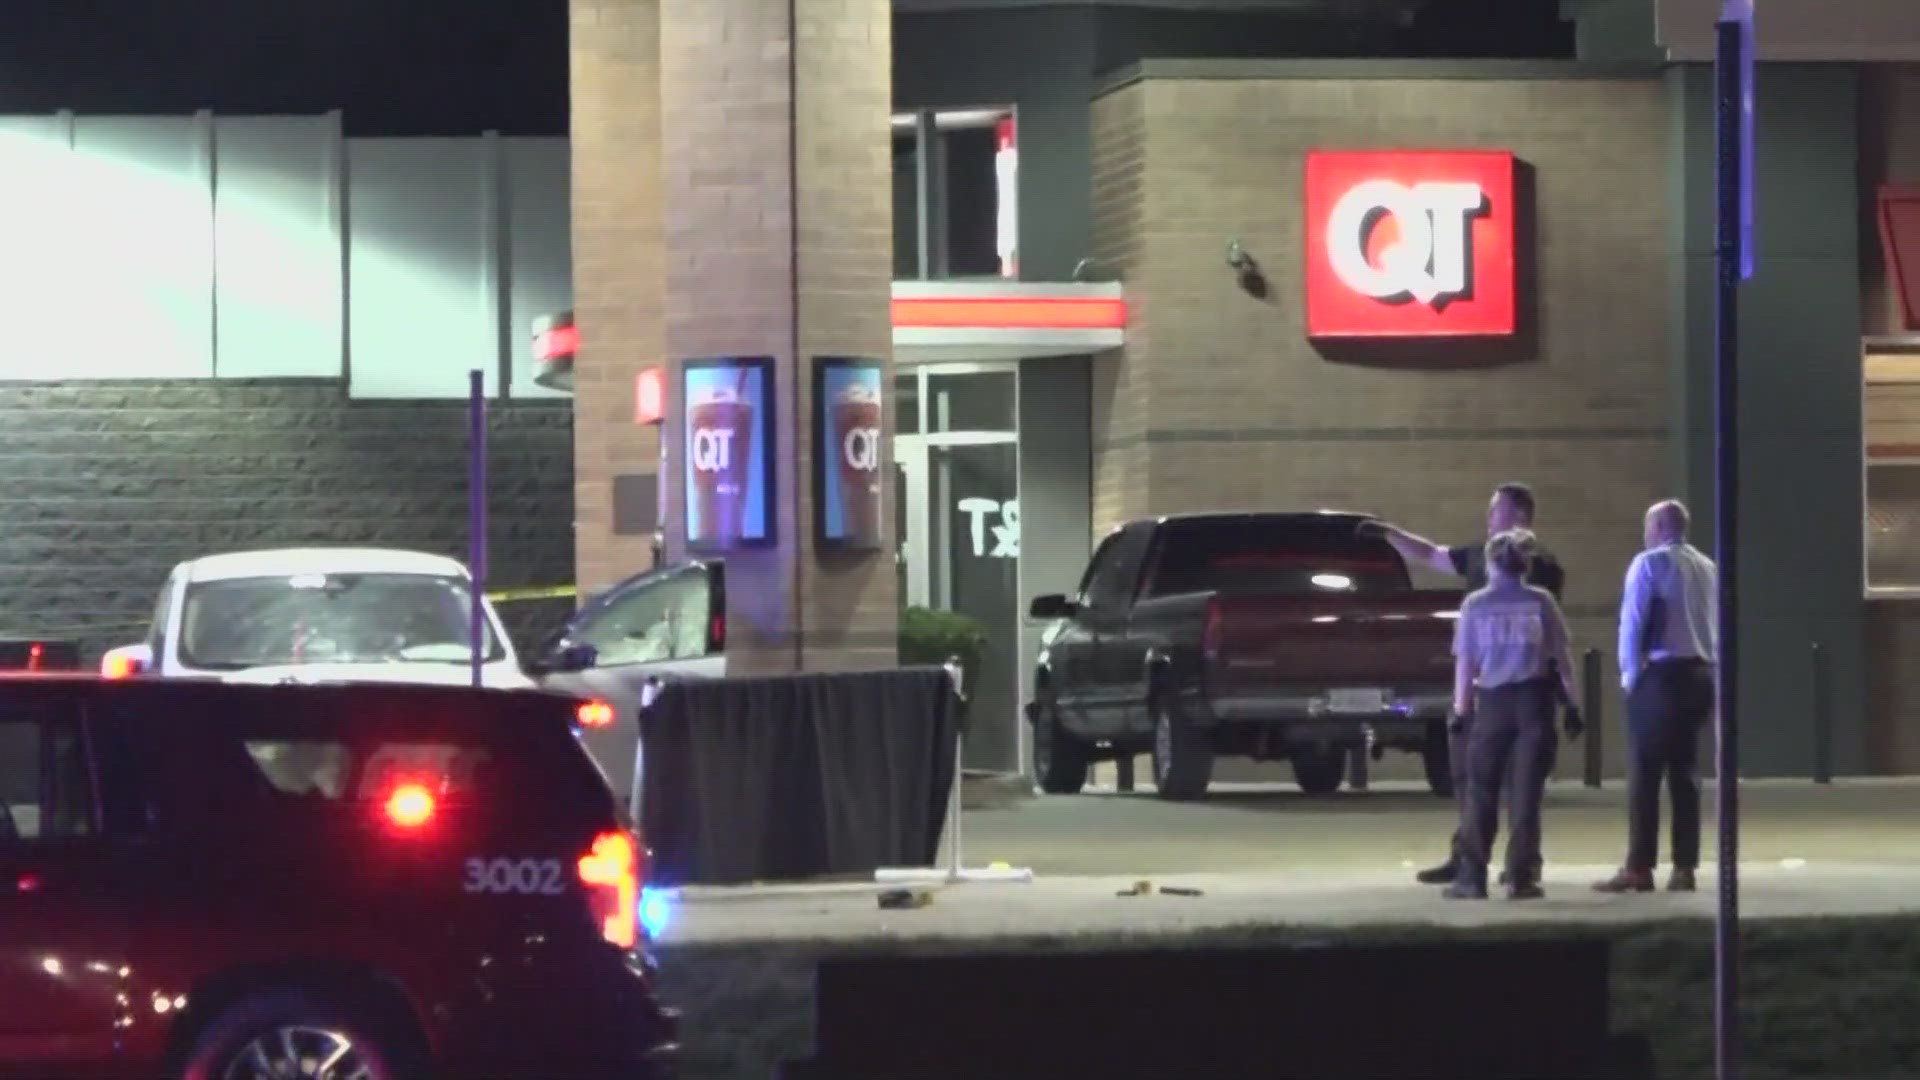 Hearing gunfire in the parking lot, the officer exited the gas station and witnessed a deadly shooting before firing at the suspect. The suspect was fatally injured.